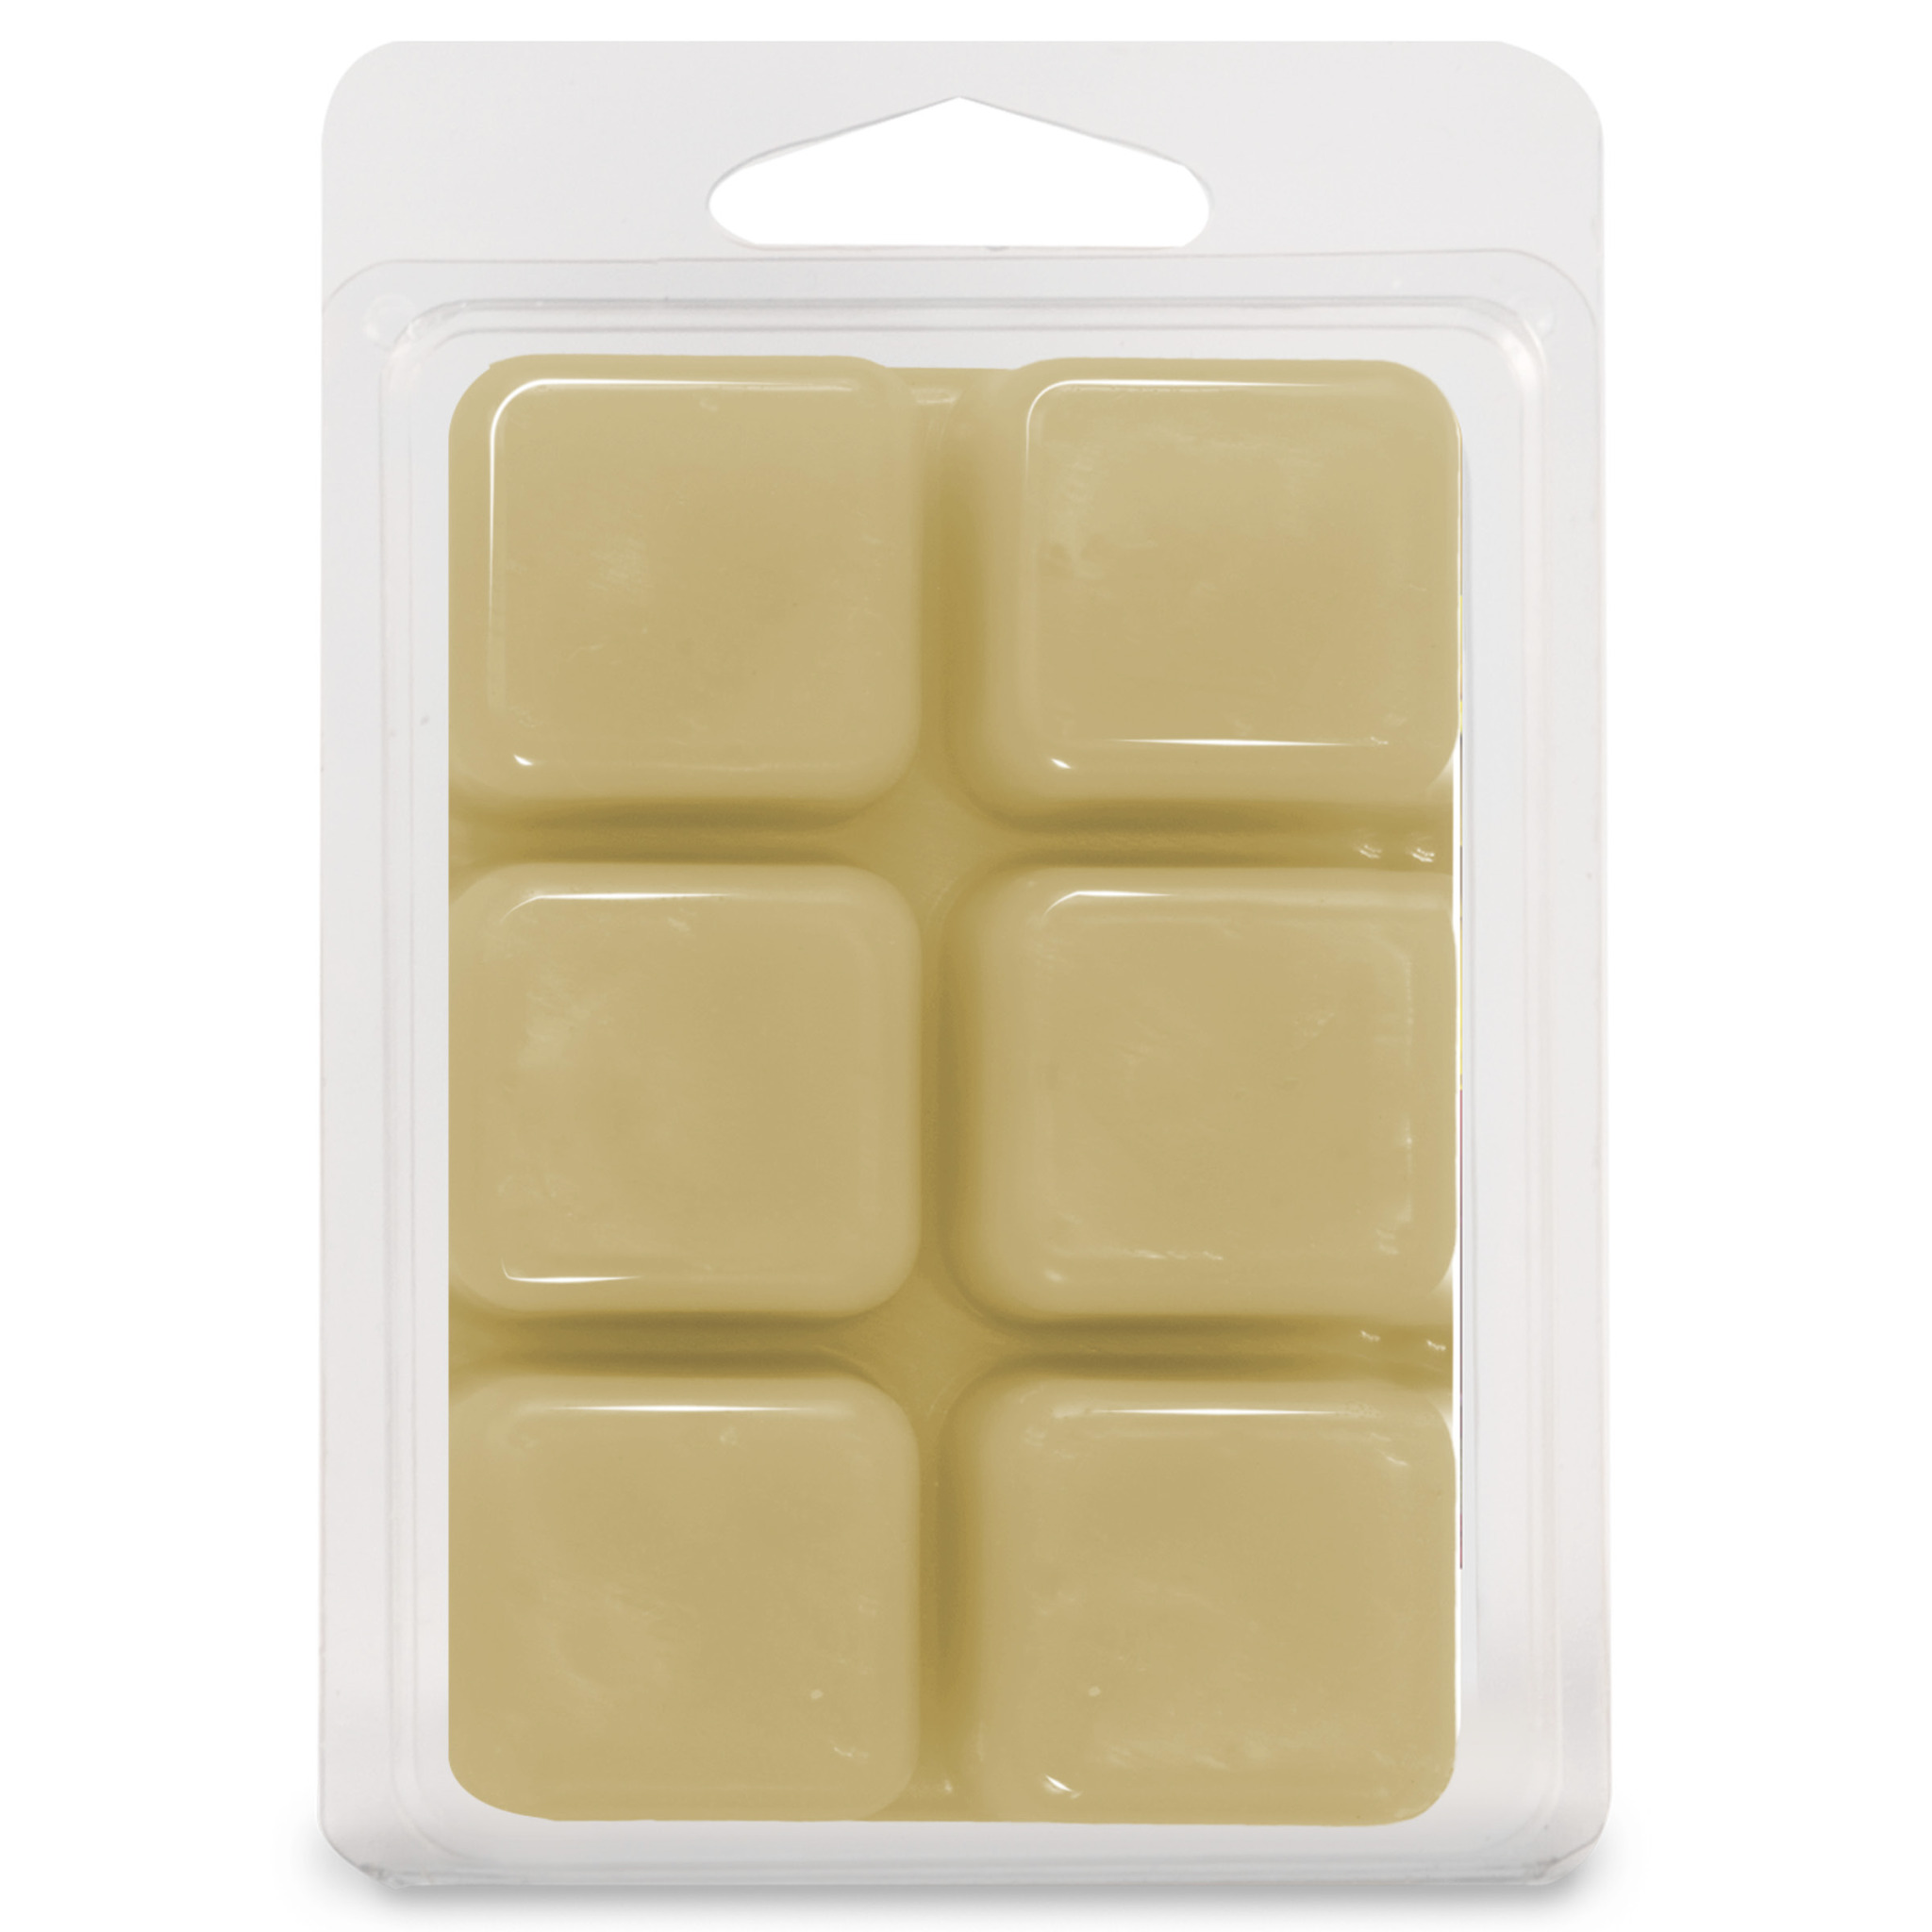 Line-Dried Linen Scented Wax Melts, Better Homes & Gardens, 2.5 oz (1-Pack) - image 3 of 10